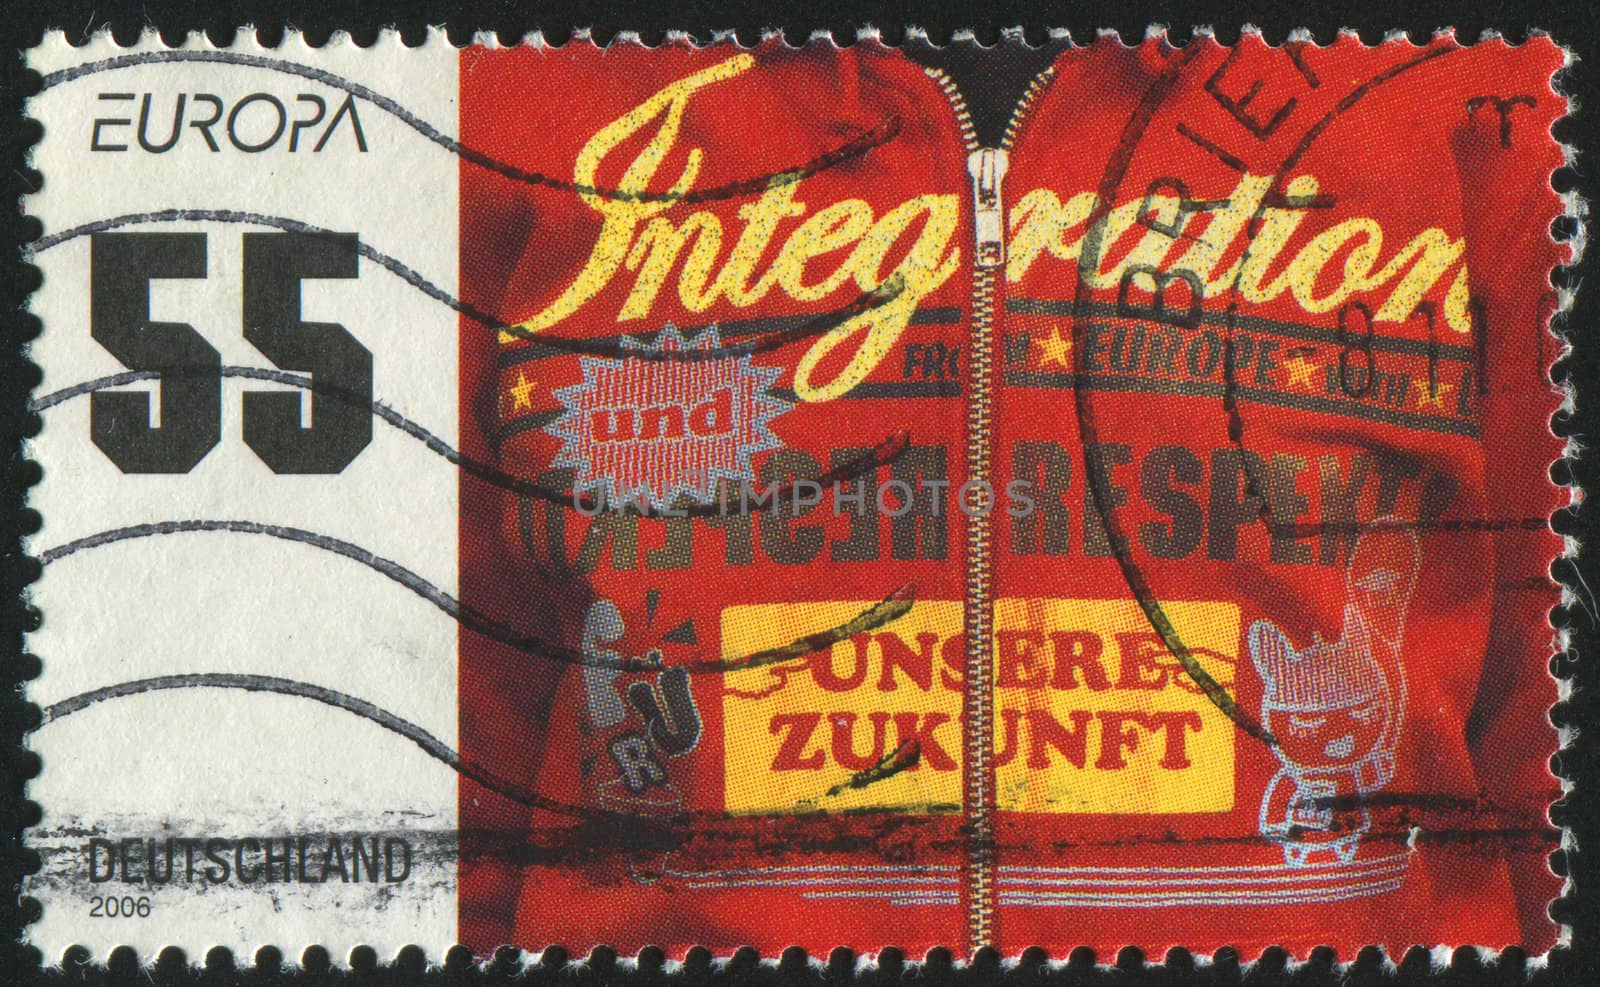 GERMANY- CIRCA 2006: stamp printed by Germany, shows jacket and zip, circa 2006.